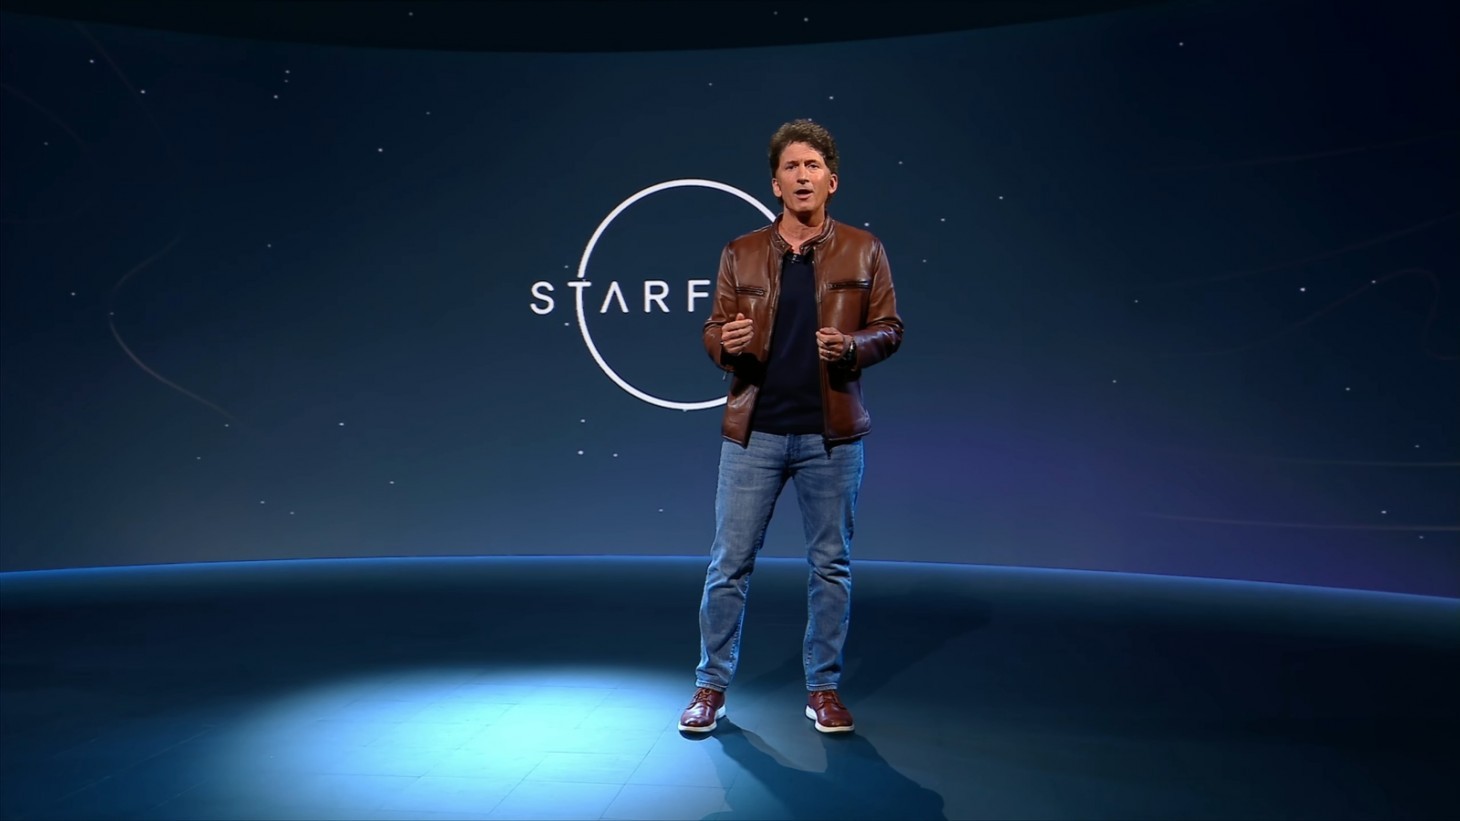 Todd Howard at Starfield announcement